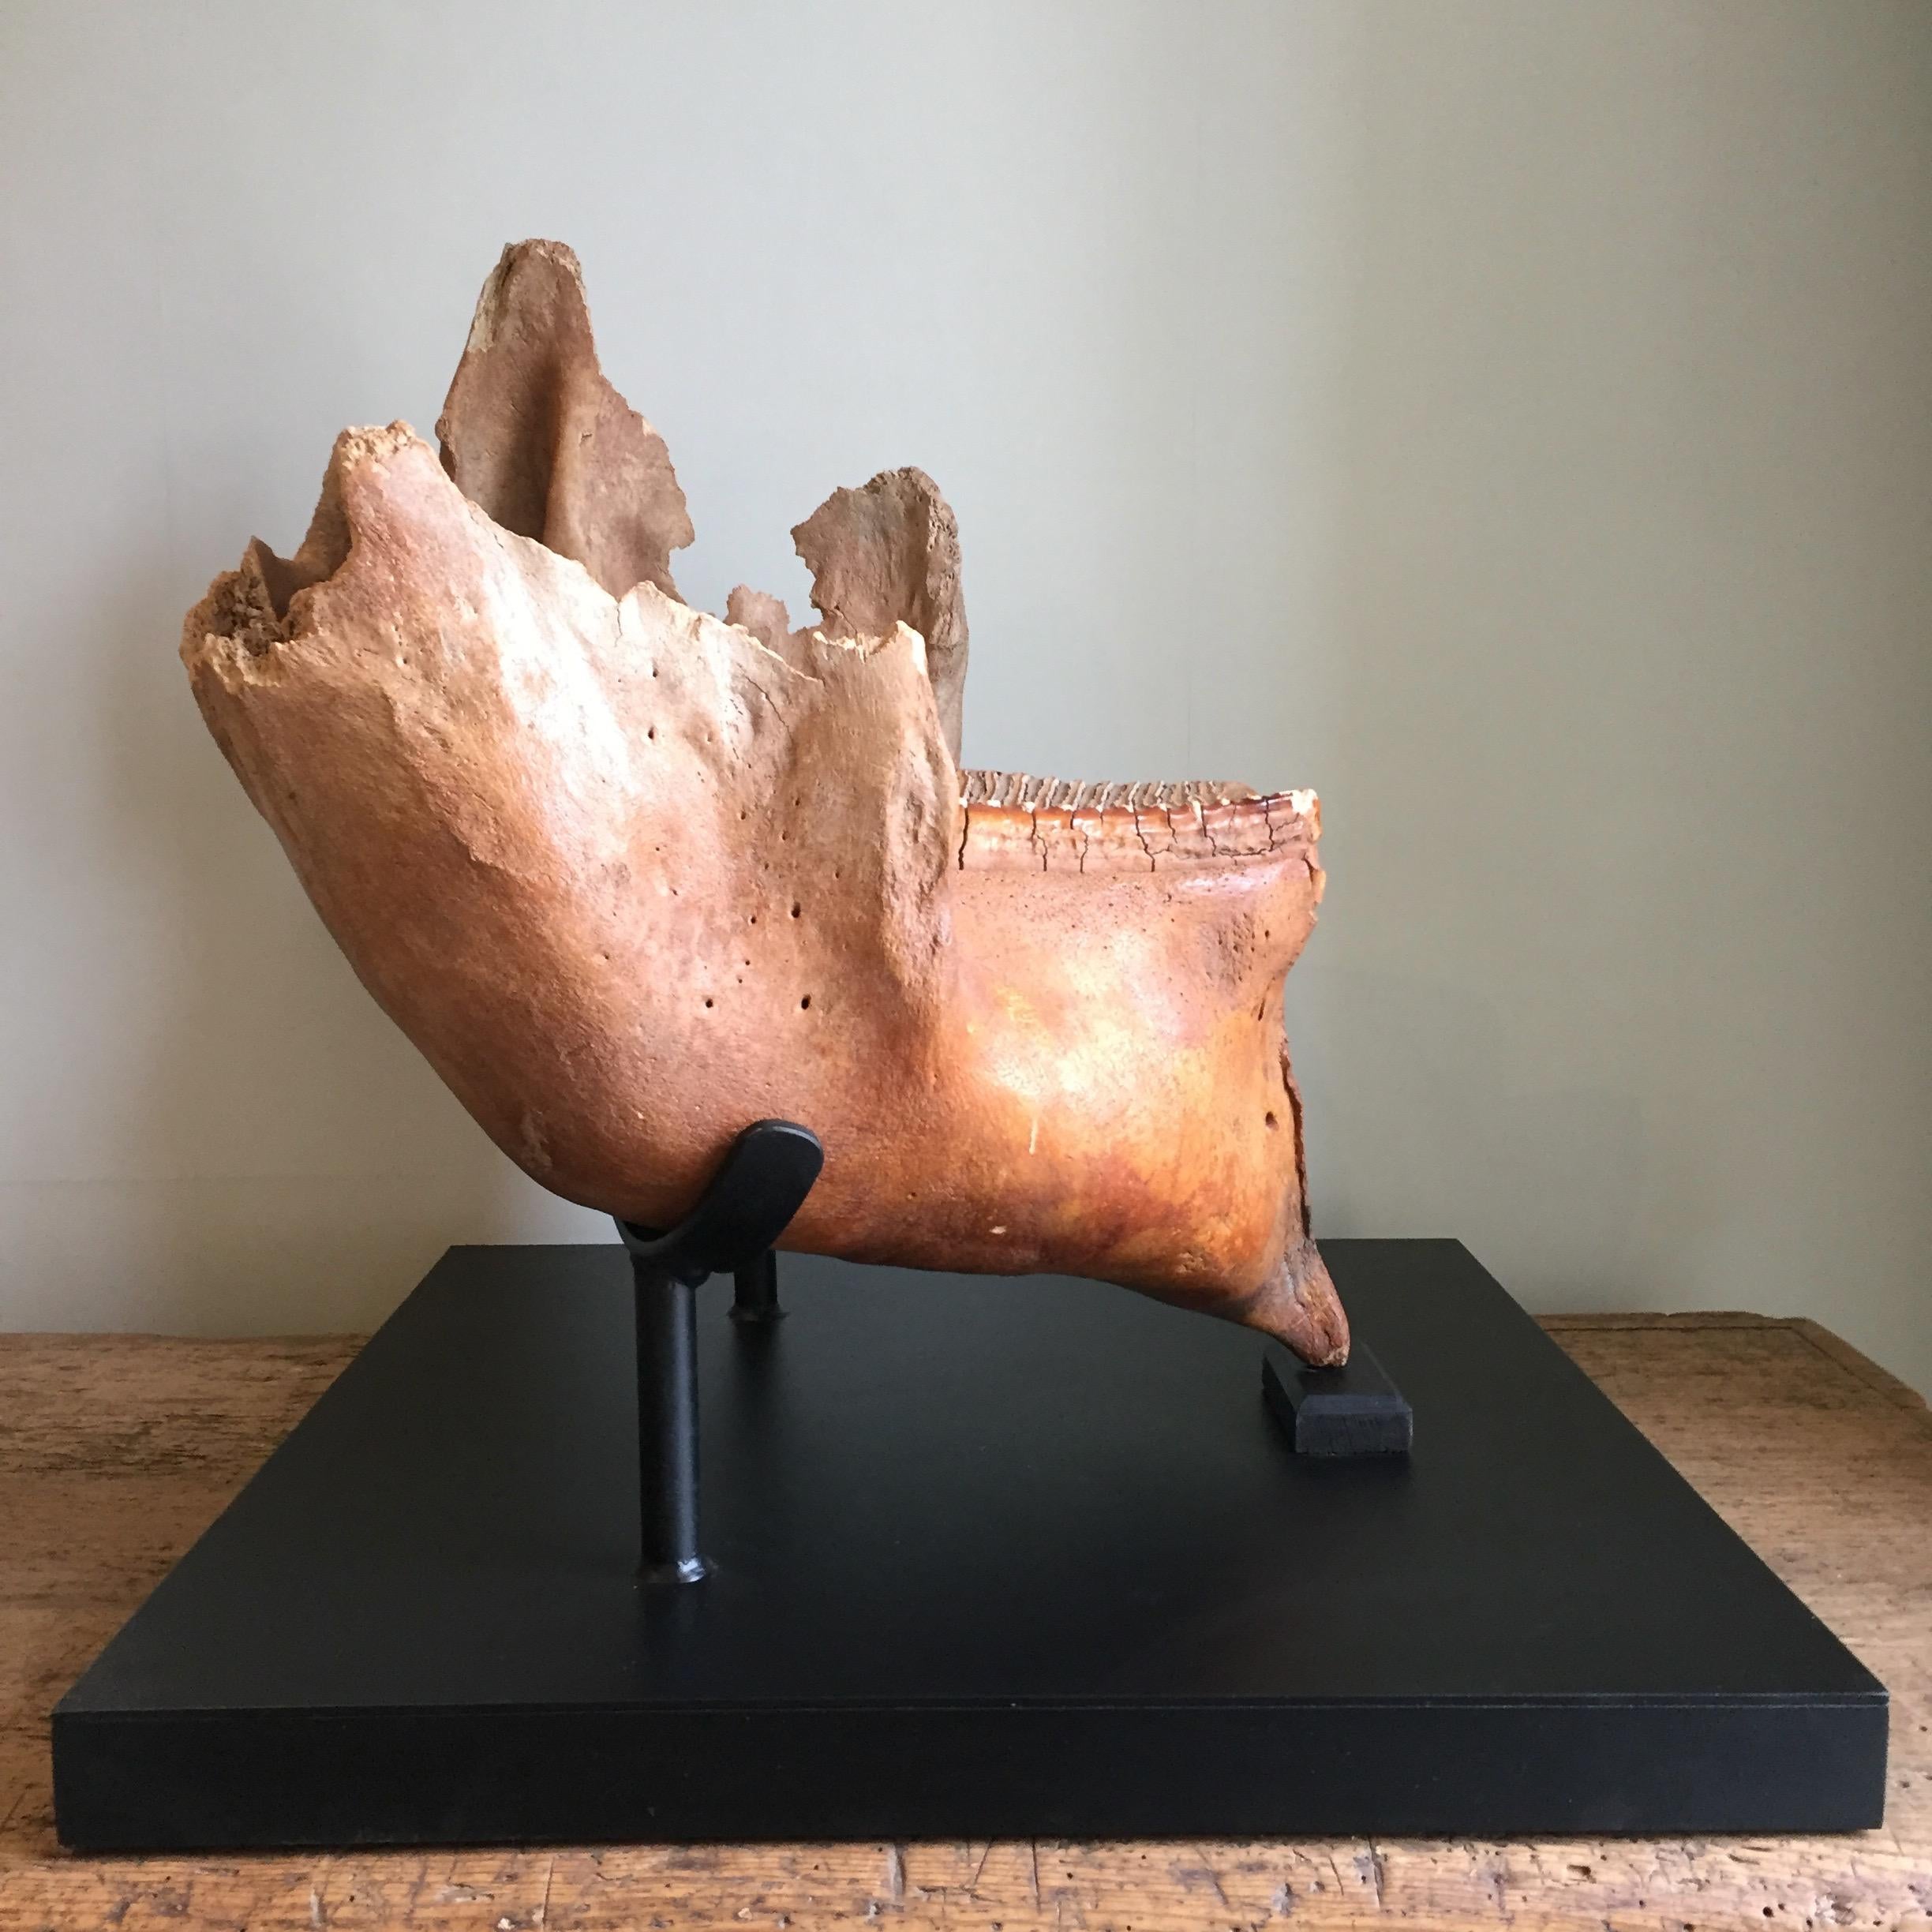 The piece shows stunning natural, almost terracotta color and fossilization to the teeth.

The jaw has been mounted on a custom metal stand to show it off at its natural angle. It would make an impressive centre piece to any setting.

The woolly